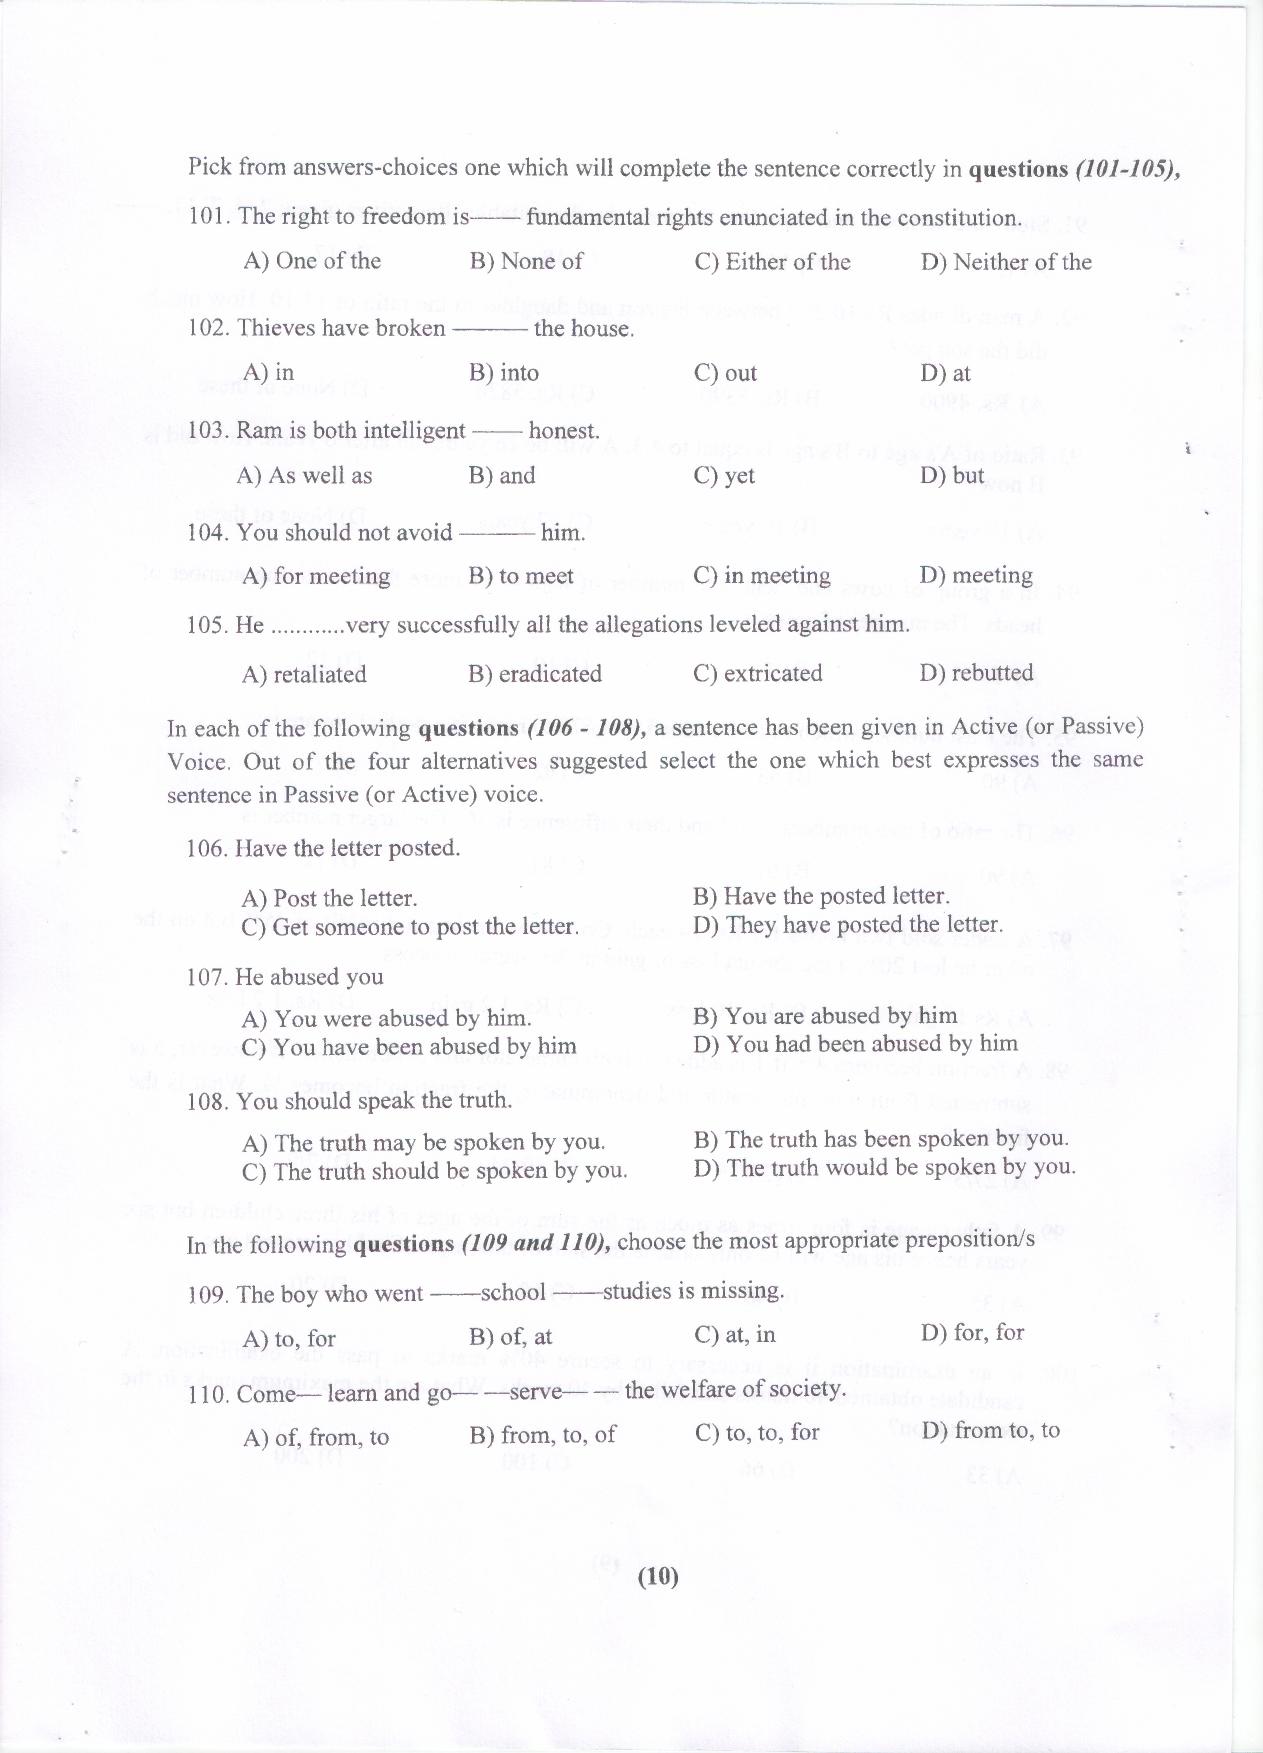 PU MET 2015 Question Booklet with Key - Page 11